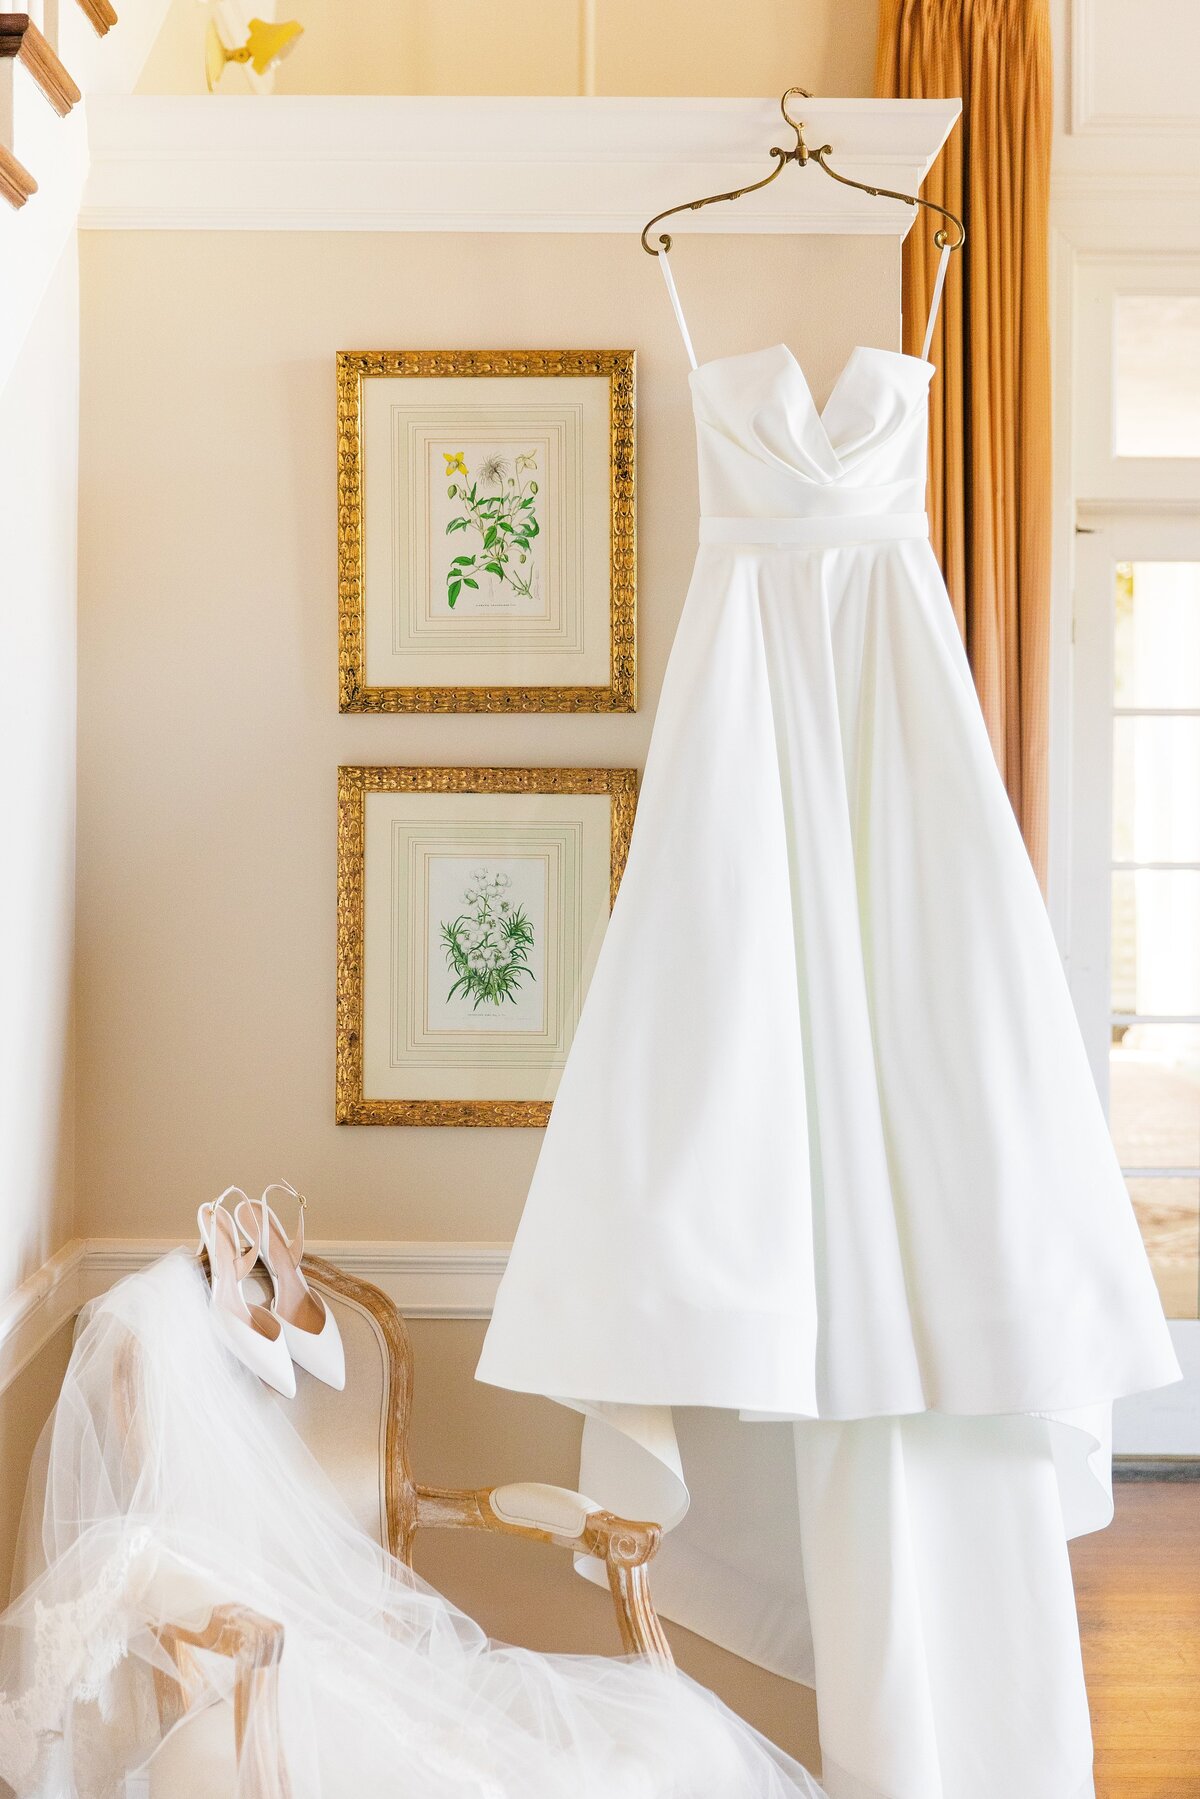 styled detail shot of the bride's dress, shoes, and veil